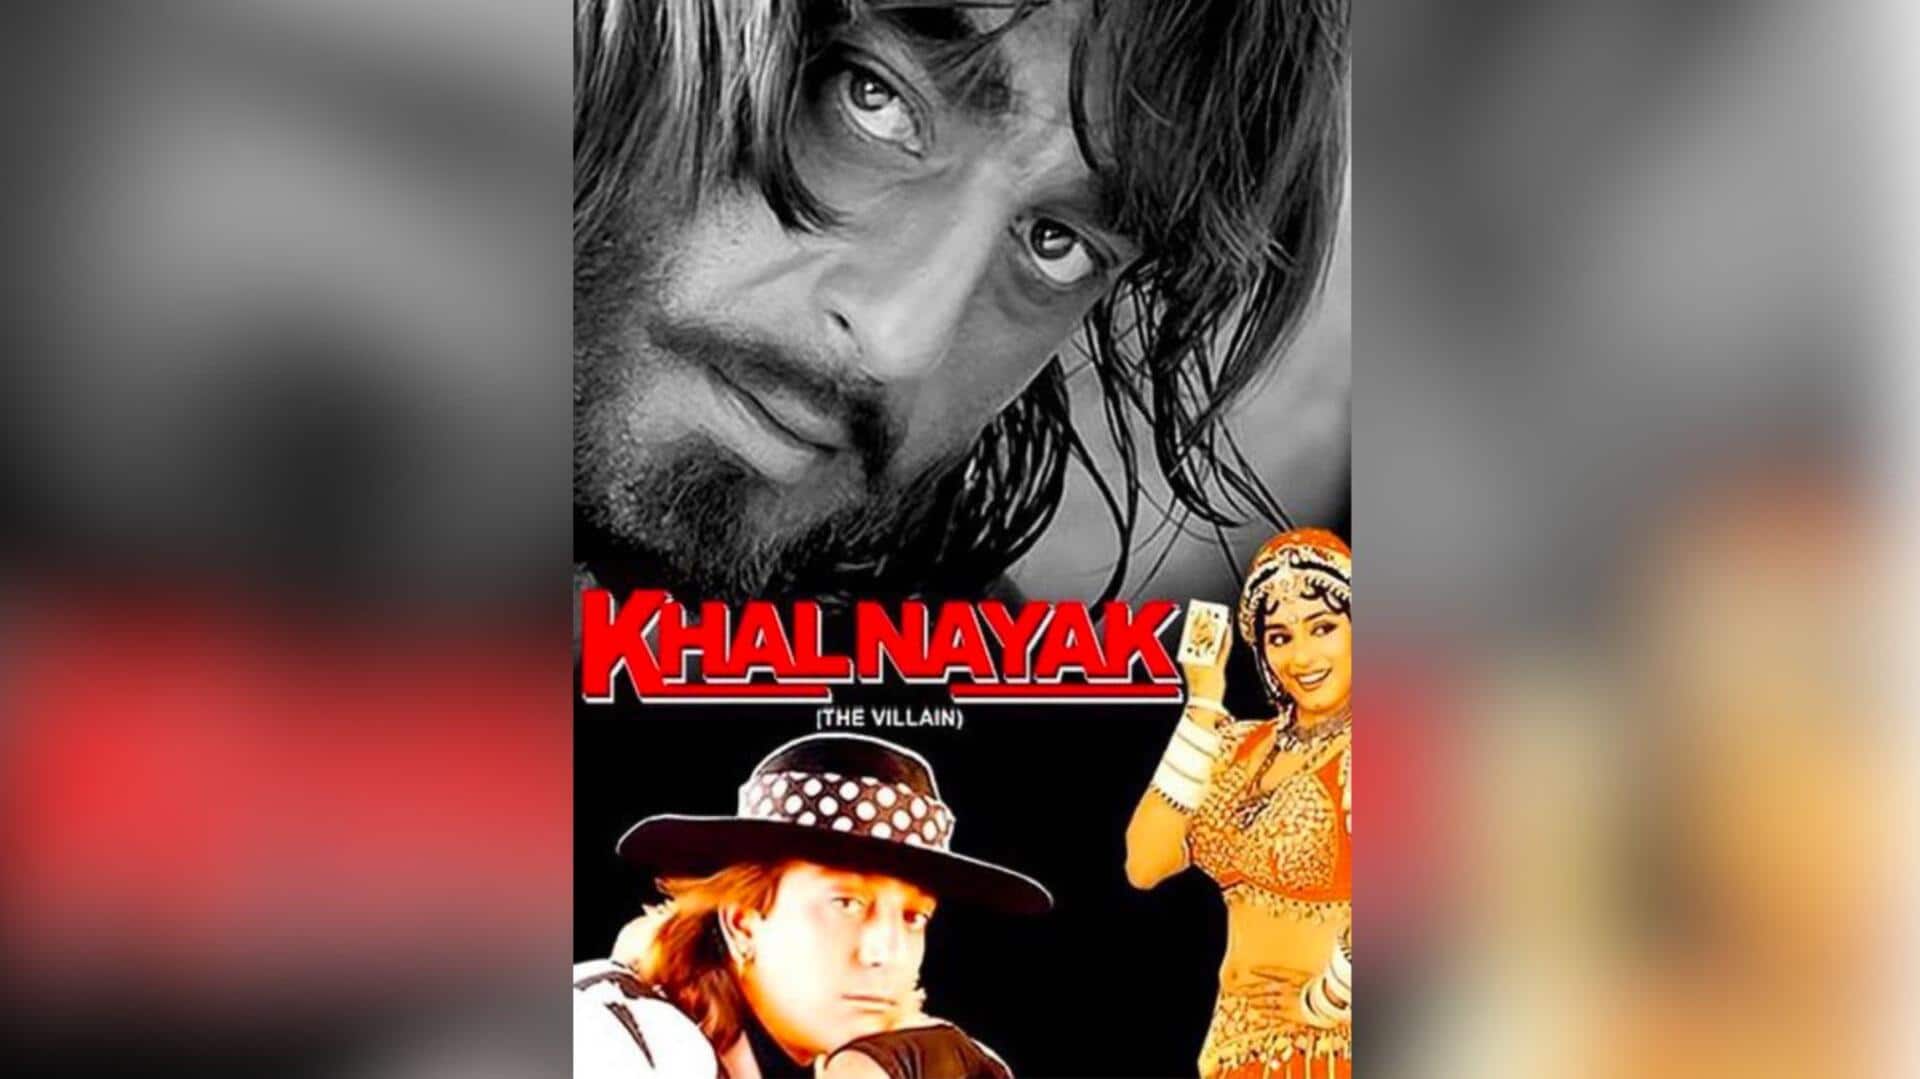 'Khal Nayak' special screening to be held next month